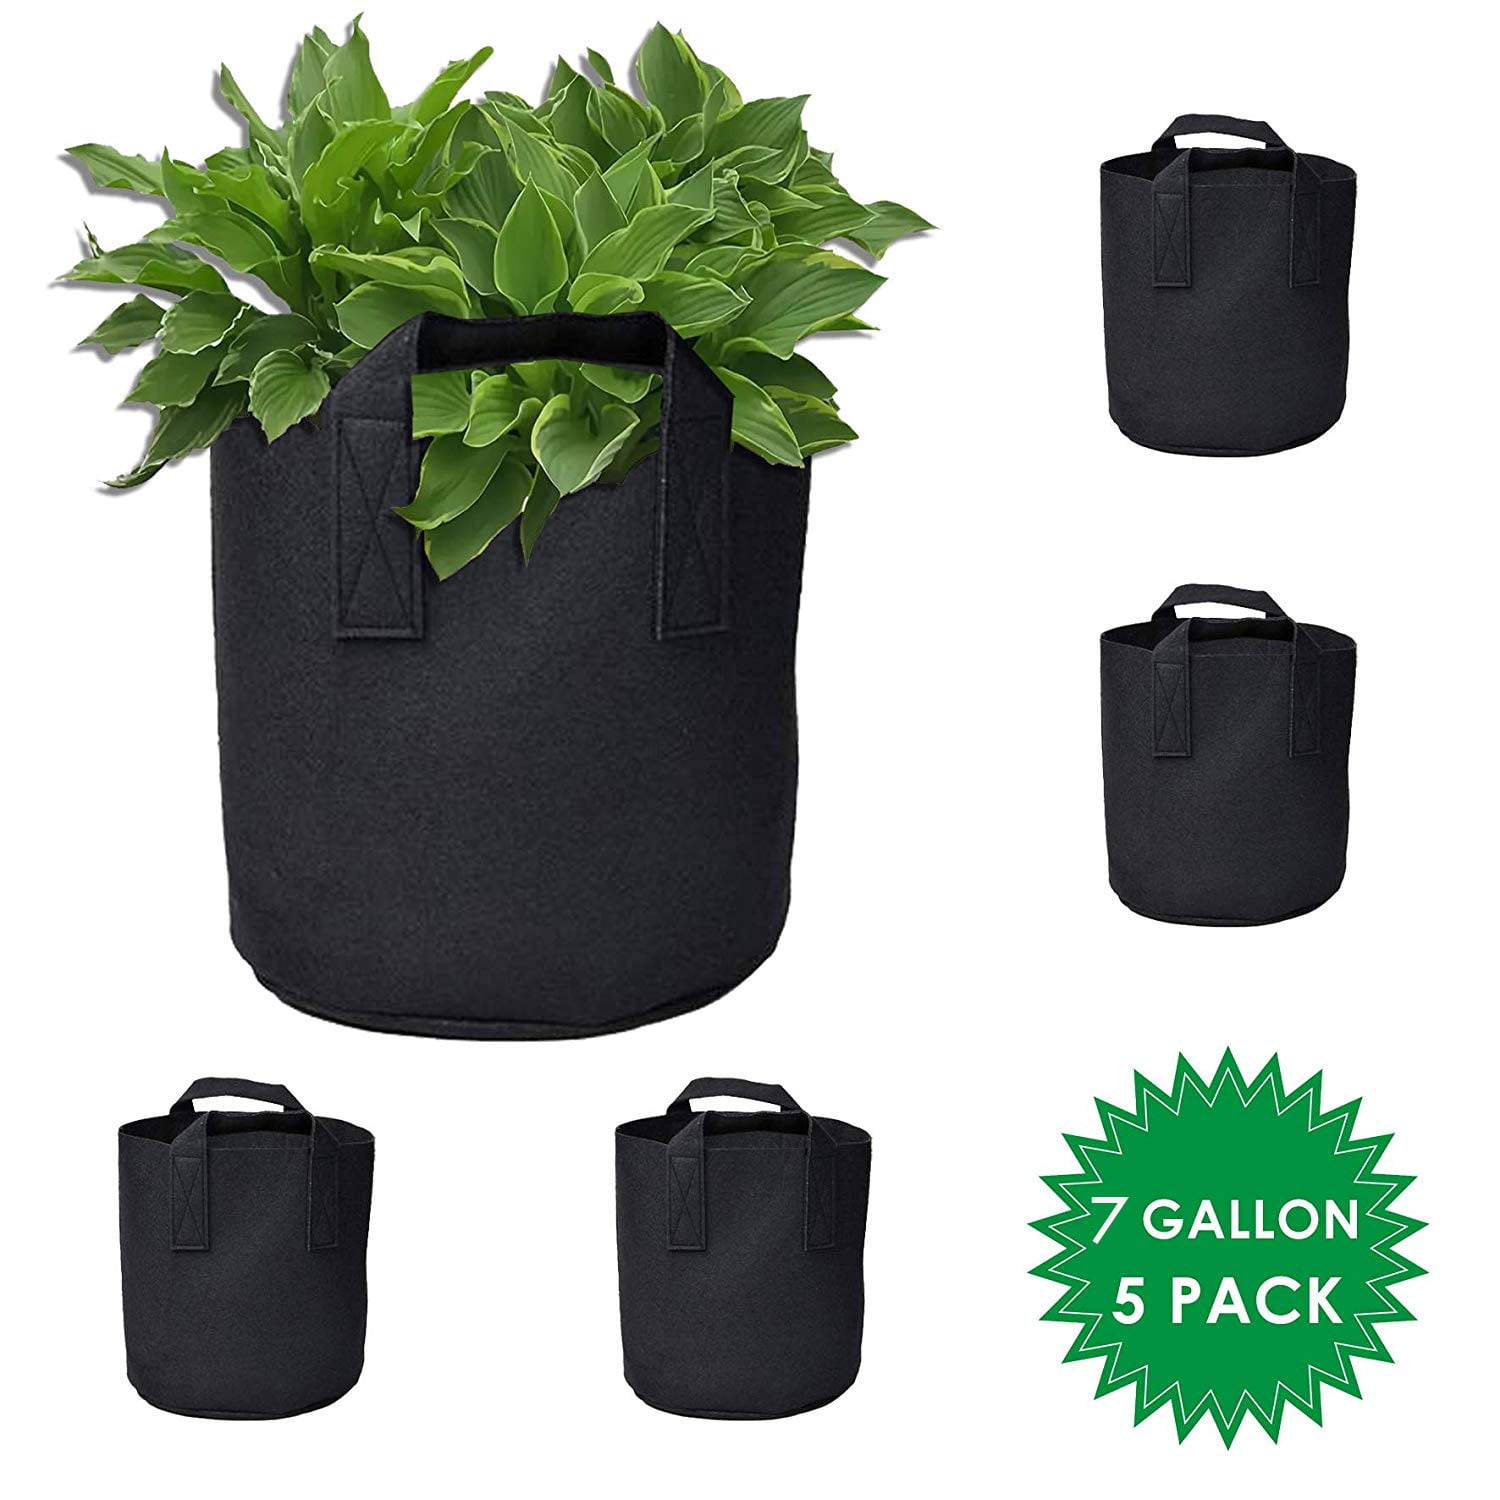 LATERN 6 Pack 5 Gallons Plant Growing Bags, Nonwoven Fabric Breathable Grow Bag 